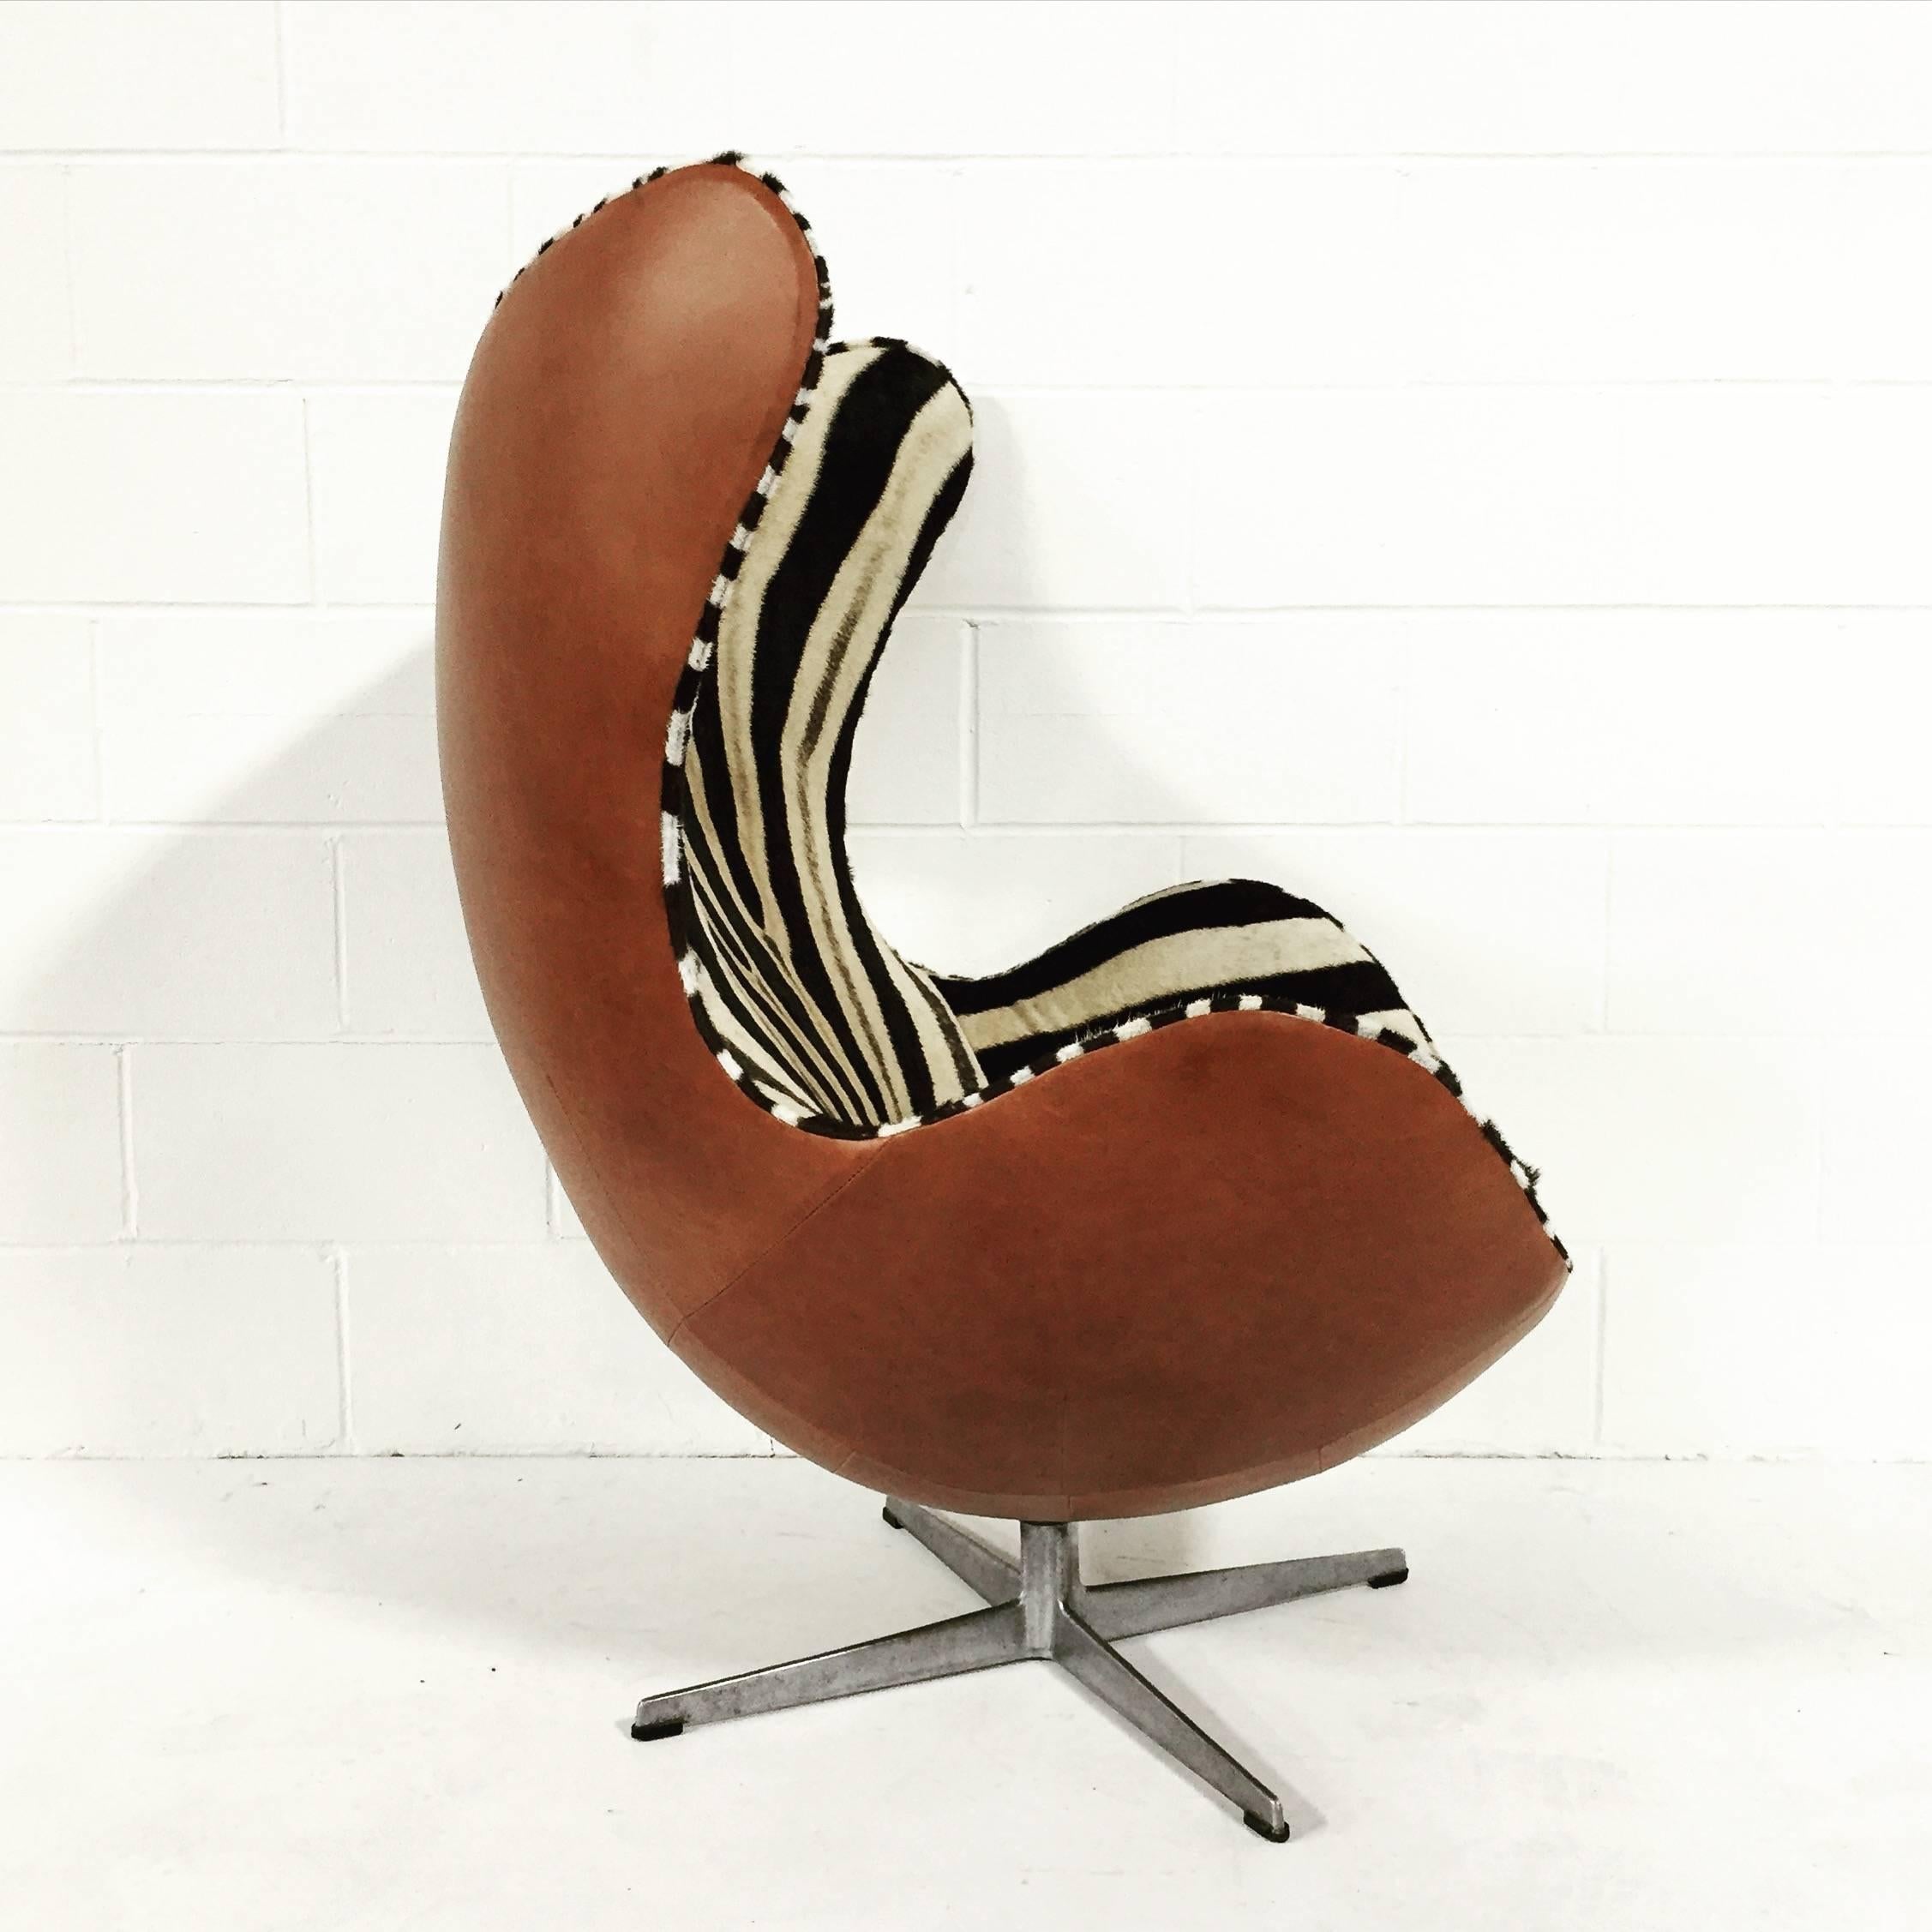 Arne Jacobsen Egg Chair in Zebra Hide and Leather 1